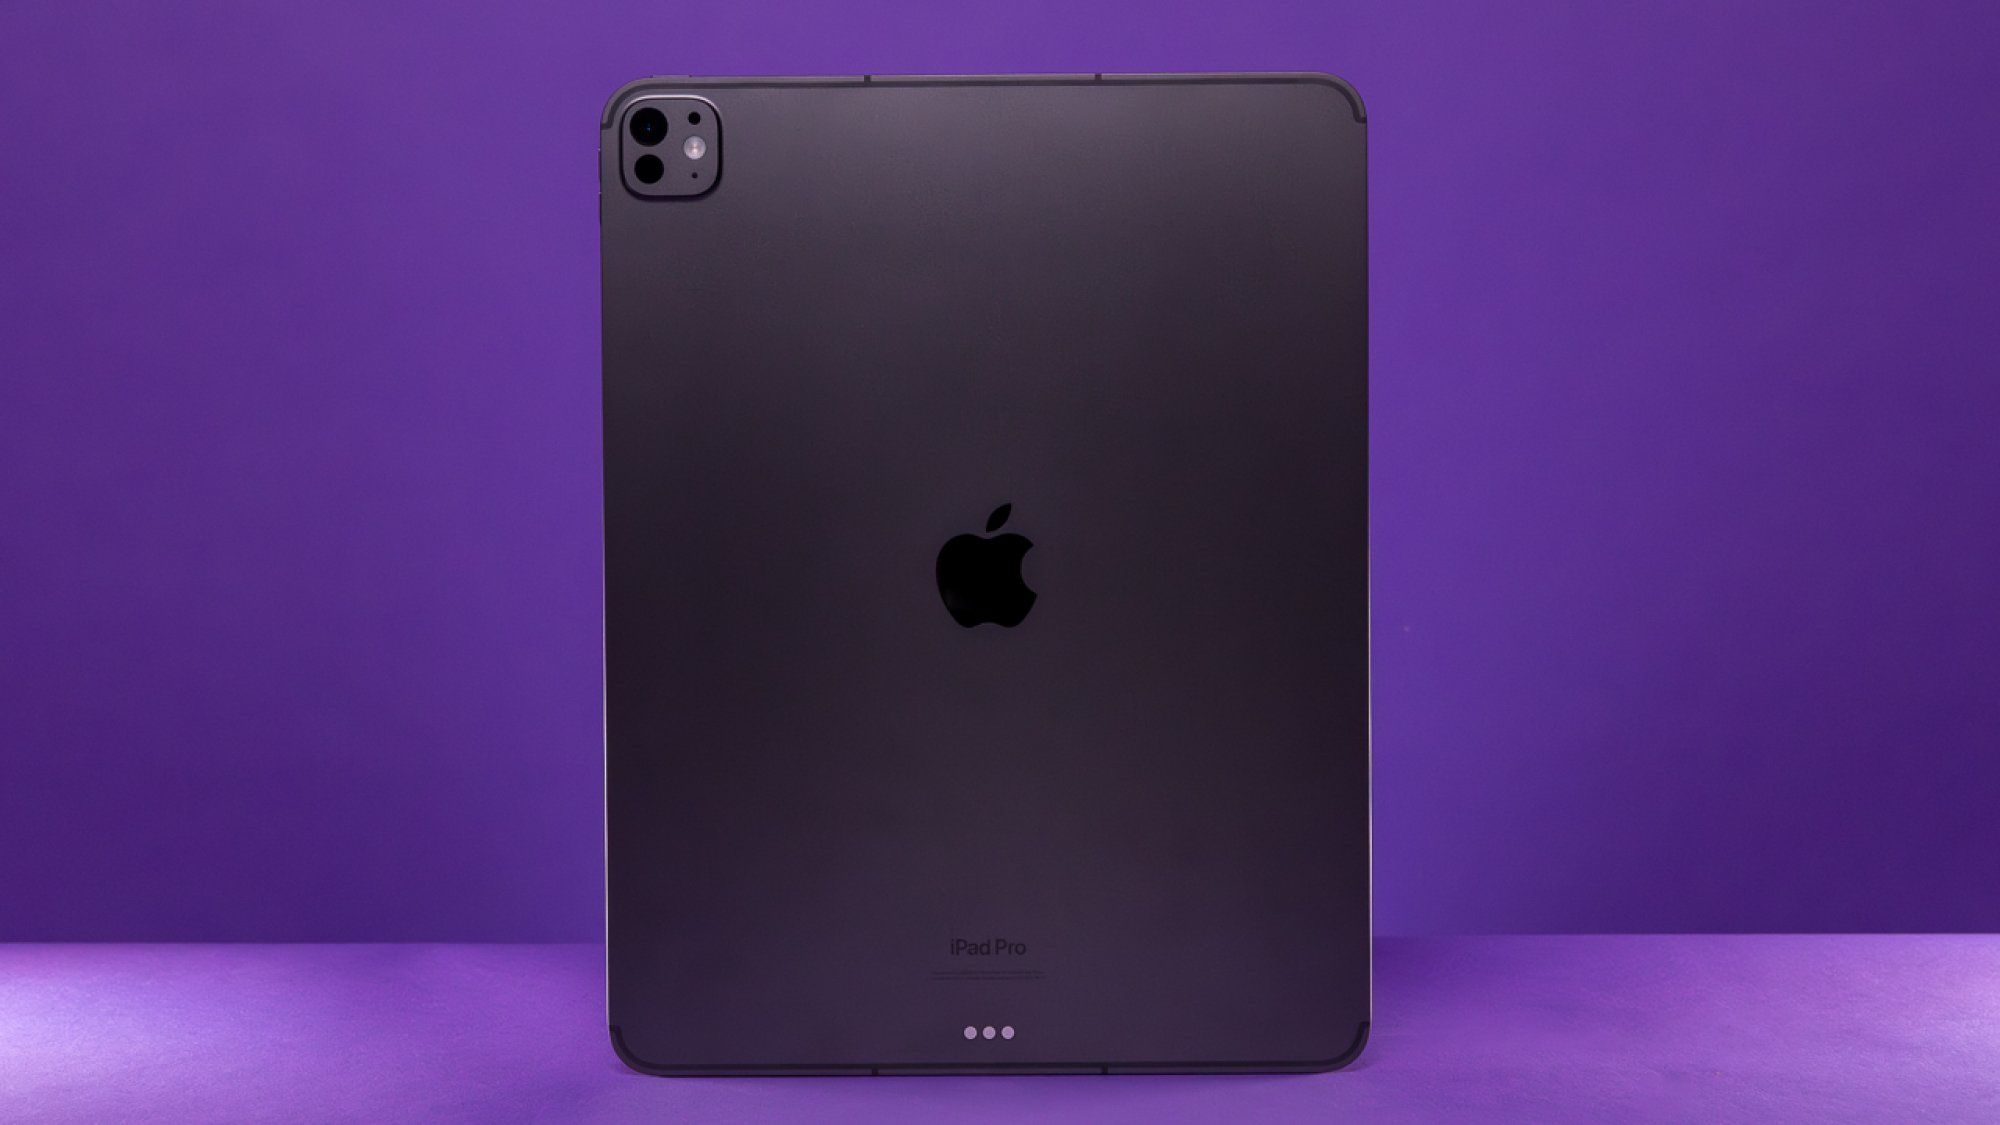 13-inch iPad Pro in front of a purple background